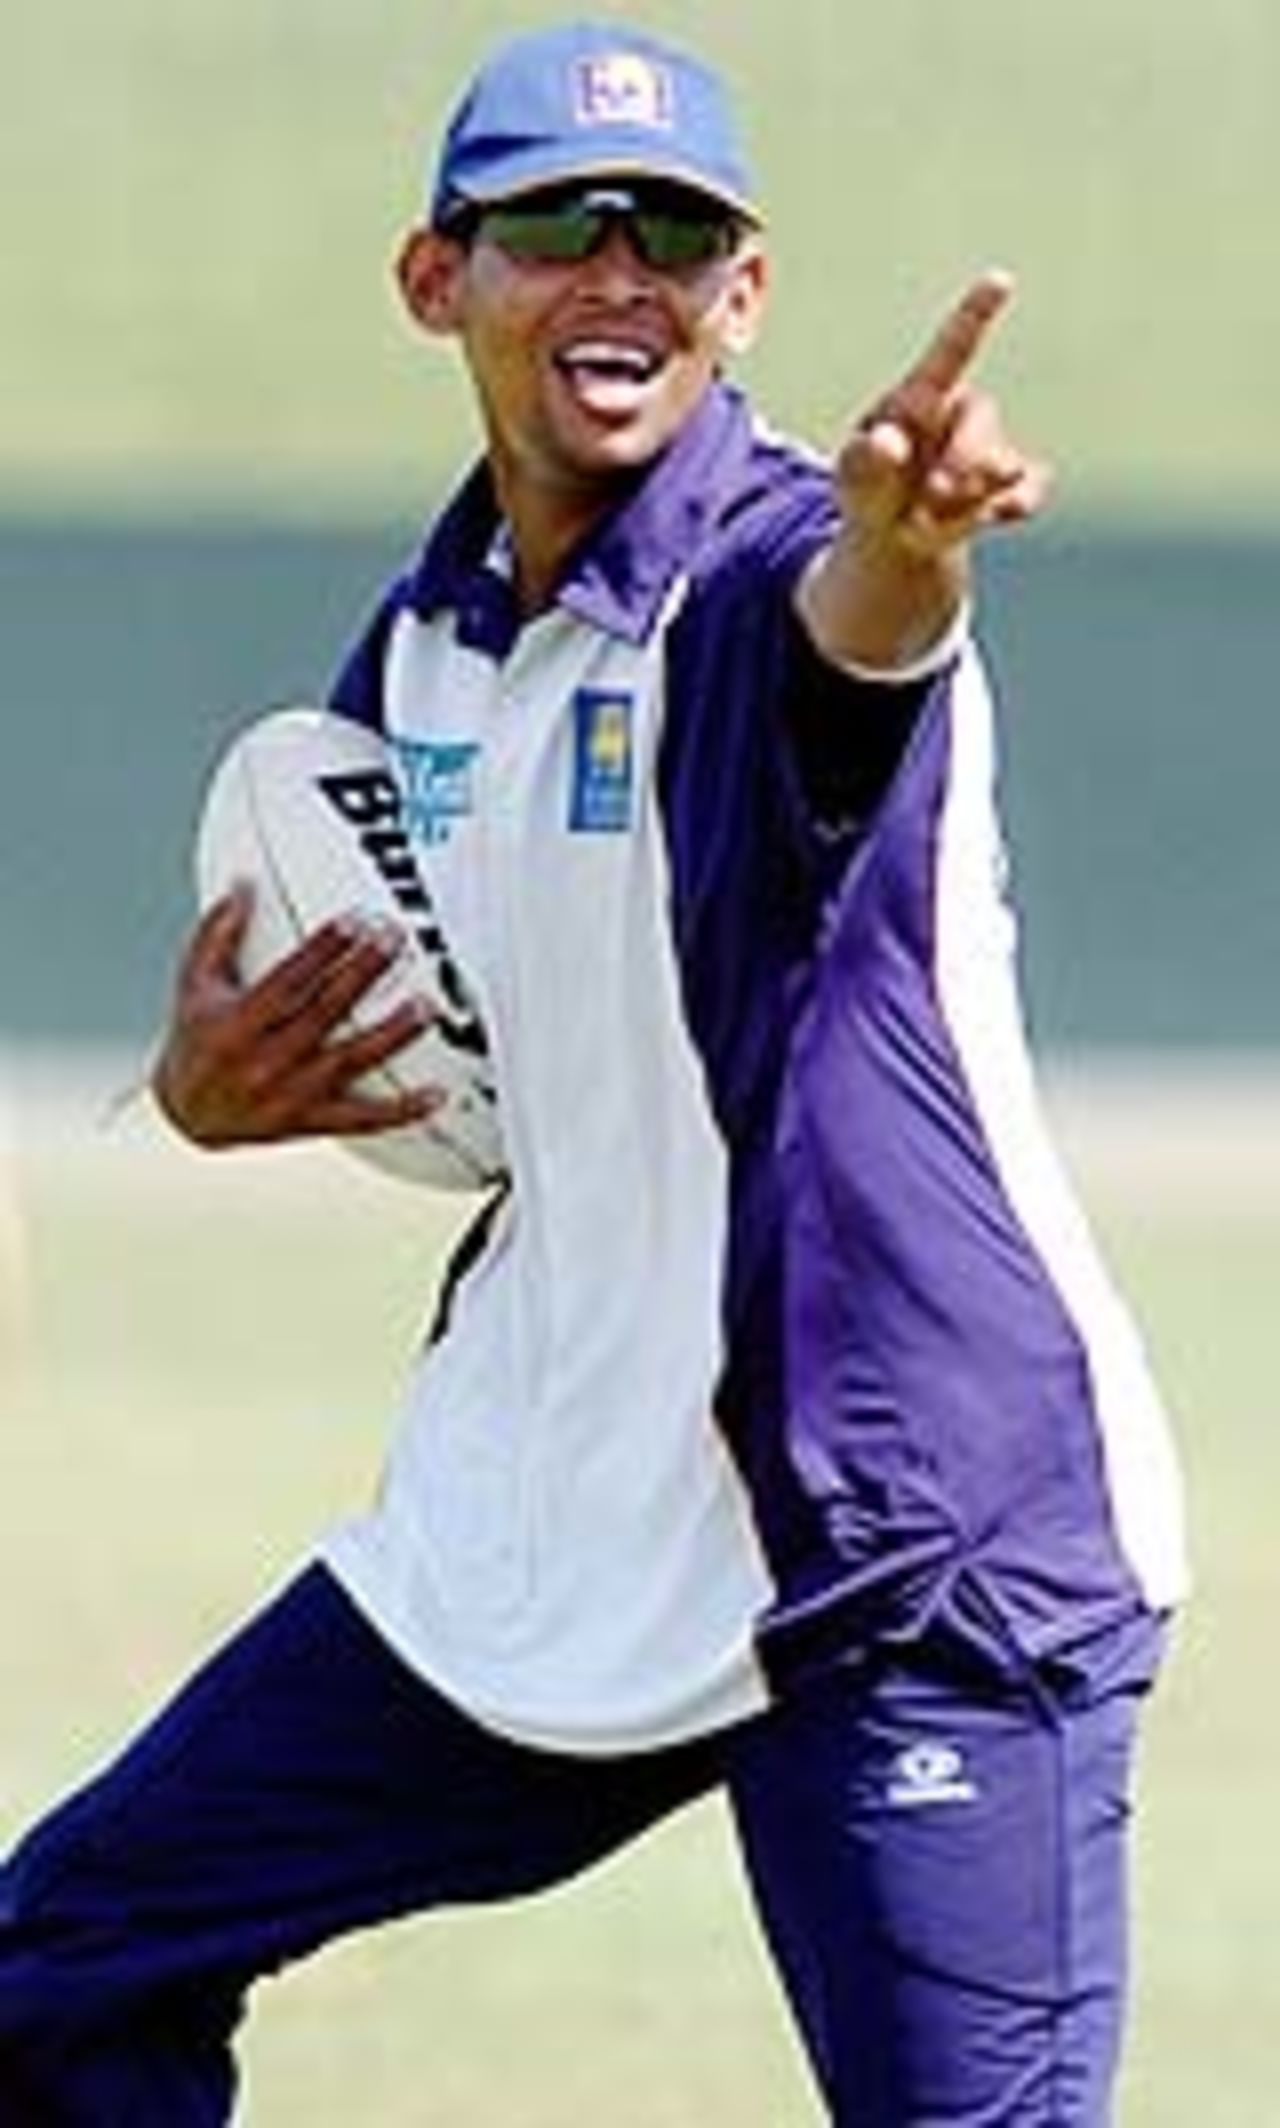 Tillakaratne Dilshan plays rugby during practice, Colombo, July 30, 2004